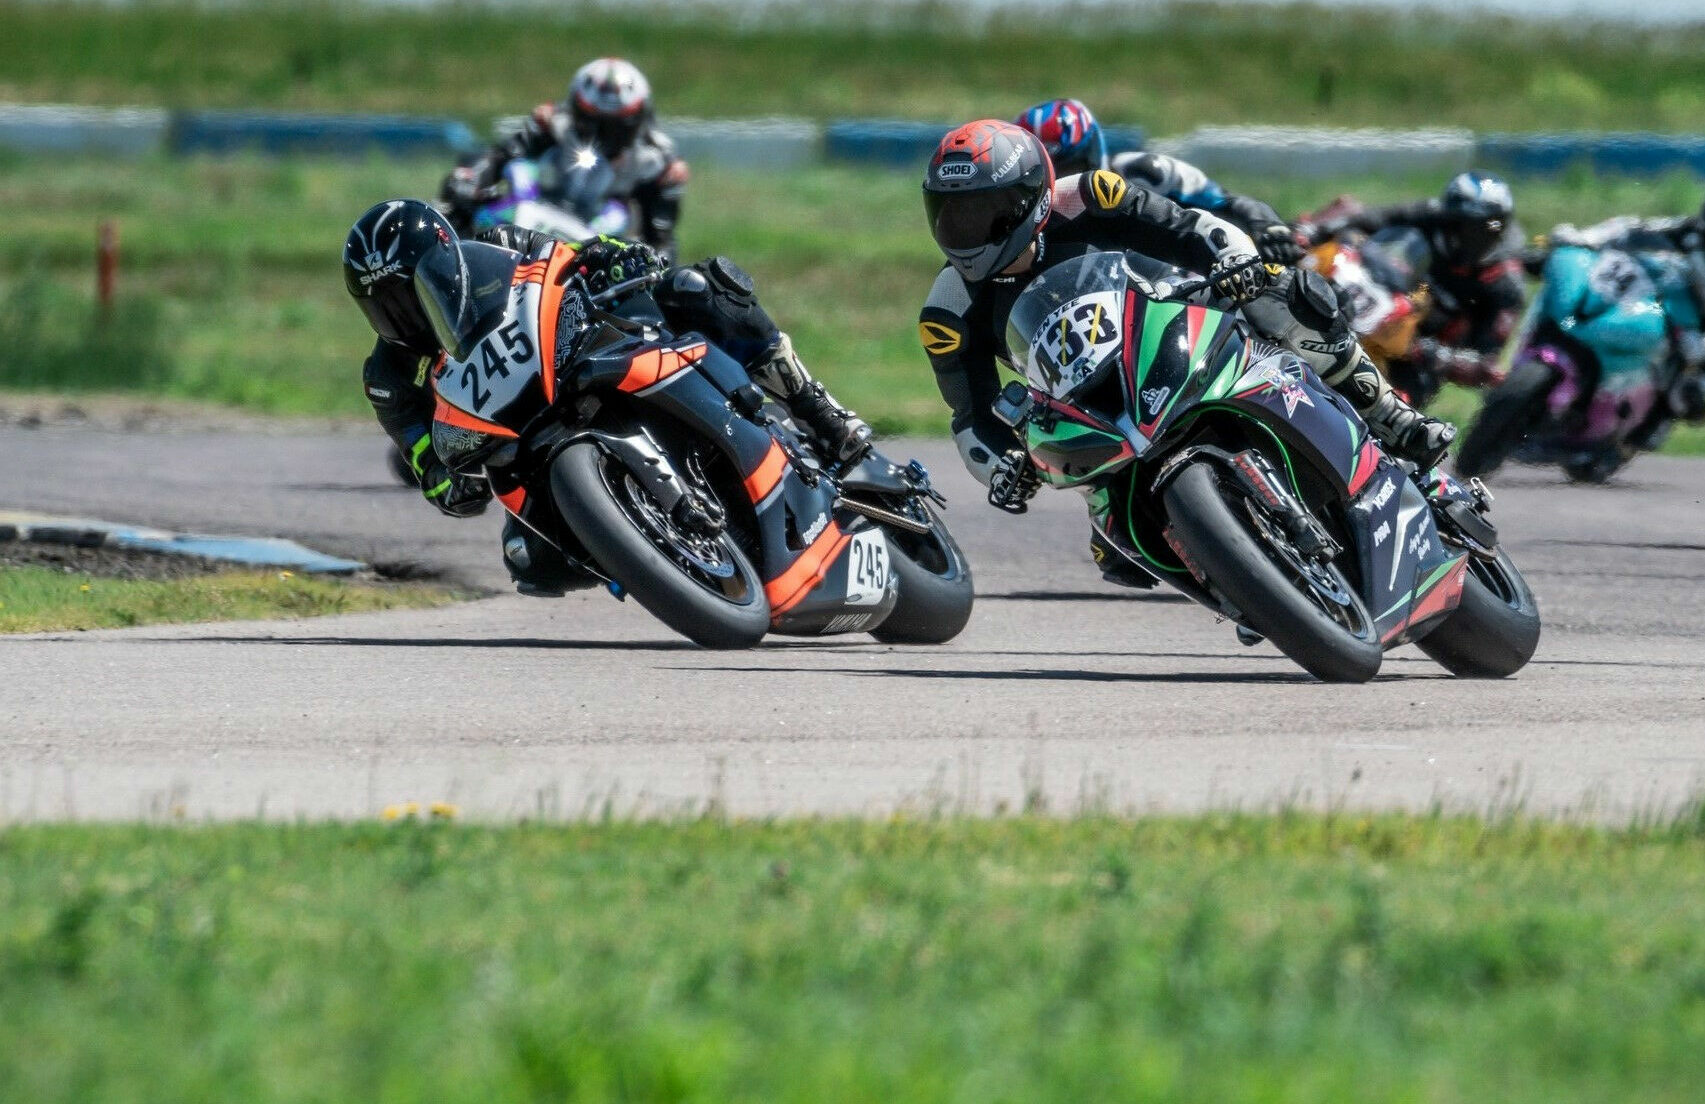 MRA racers Ken Yee (433) and Jason Martinez (245) at High Plains Raceway. Photo by Kelly Vernell, courtesy MRA.